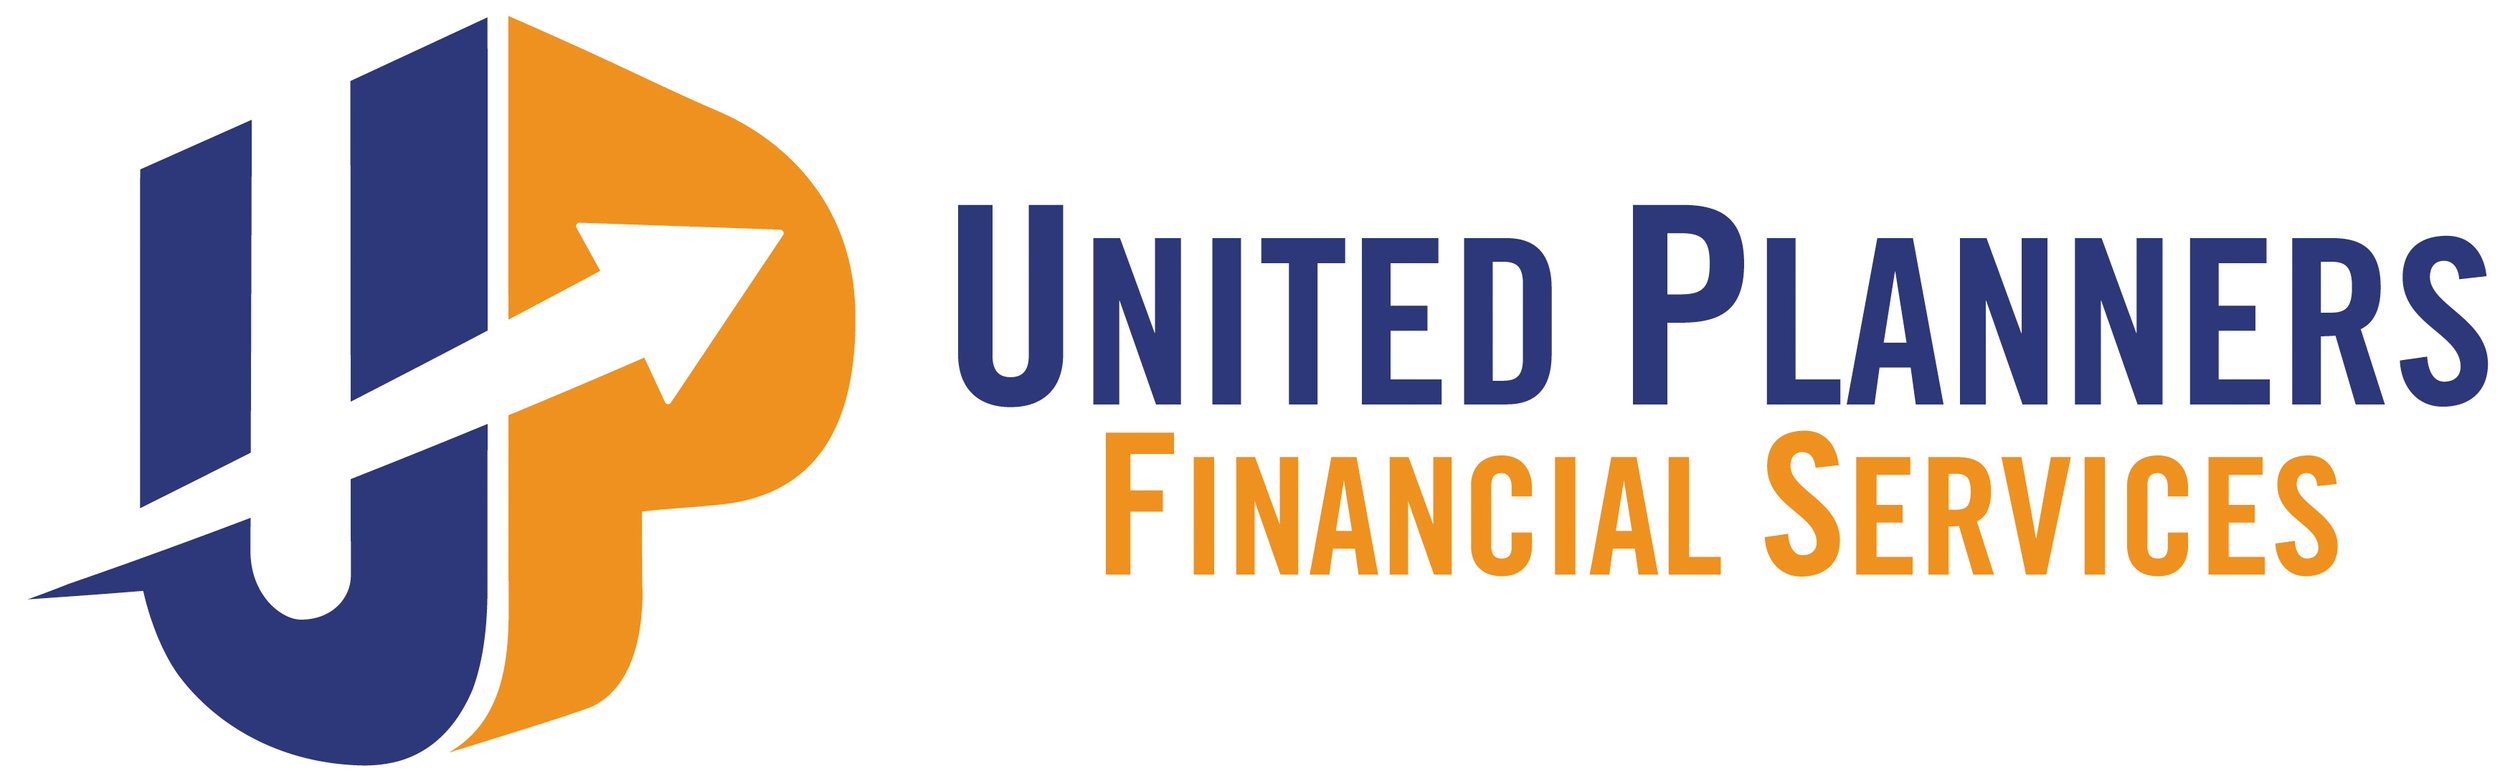 United Planners Financial Services (Copy)